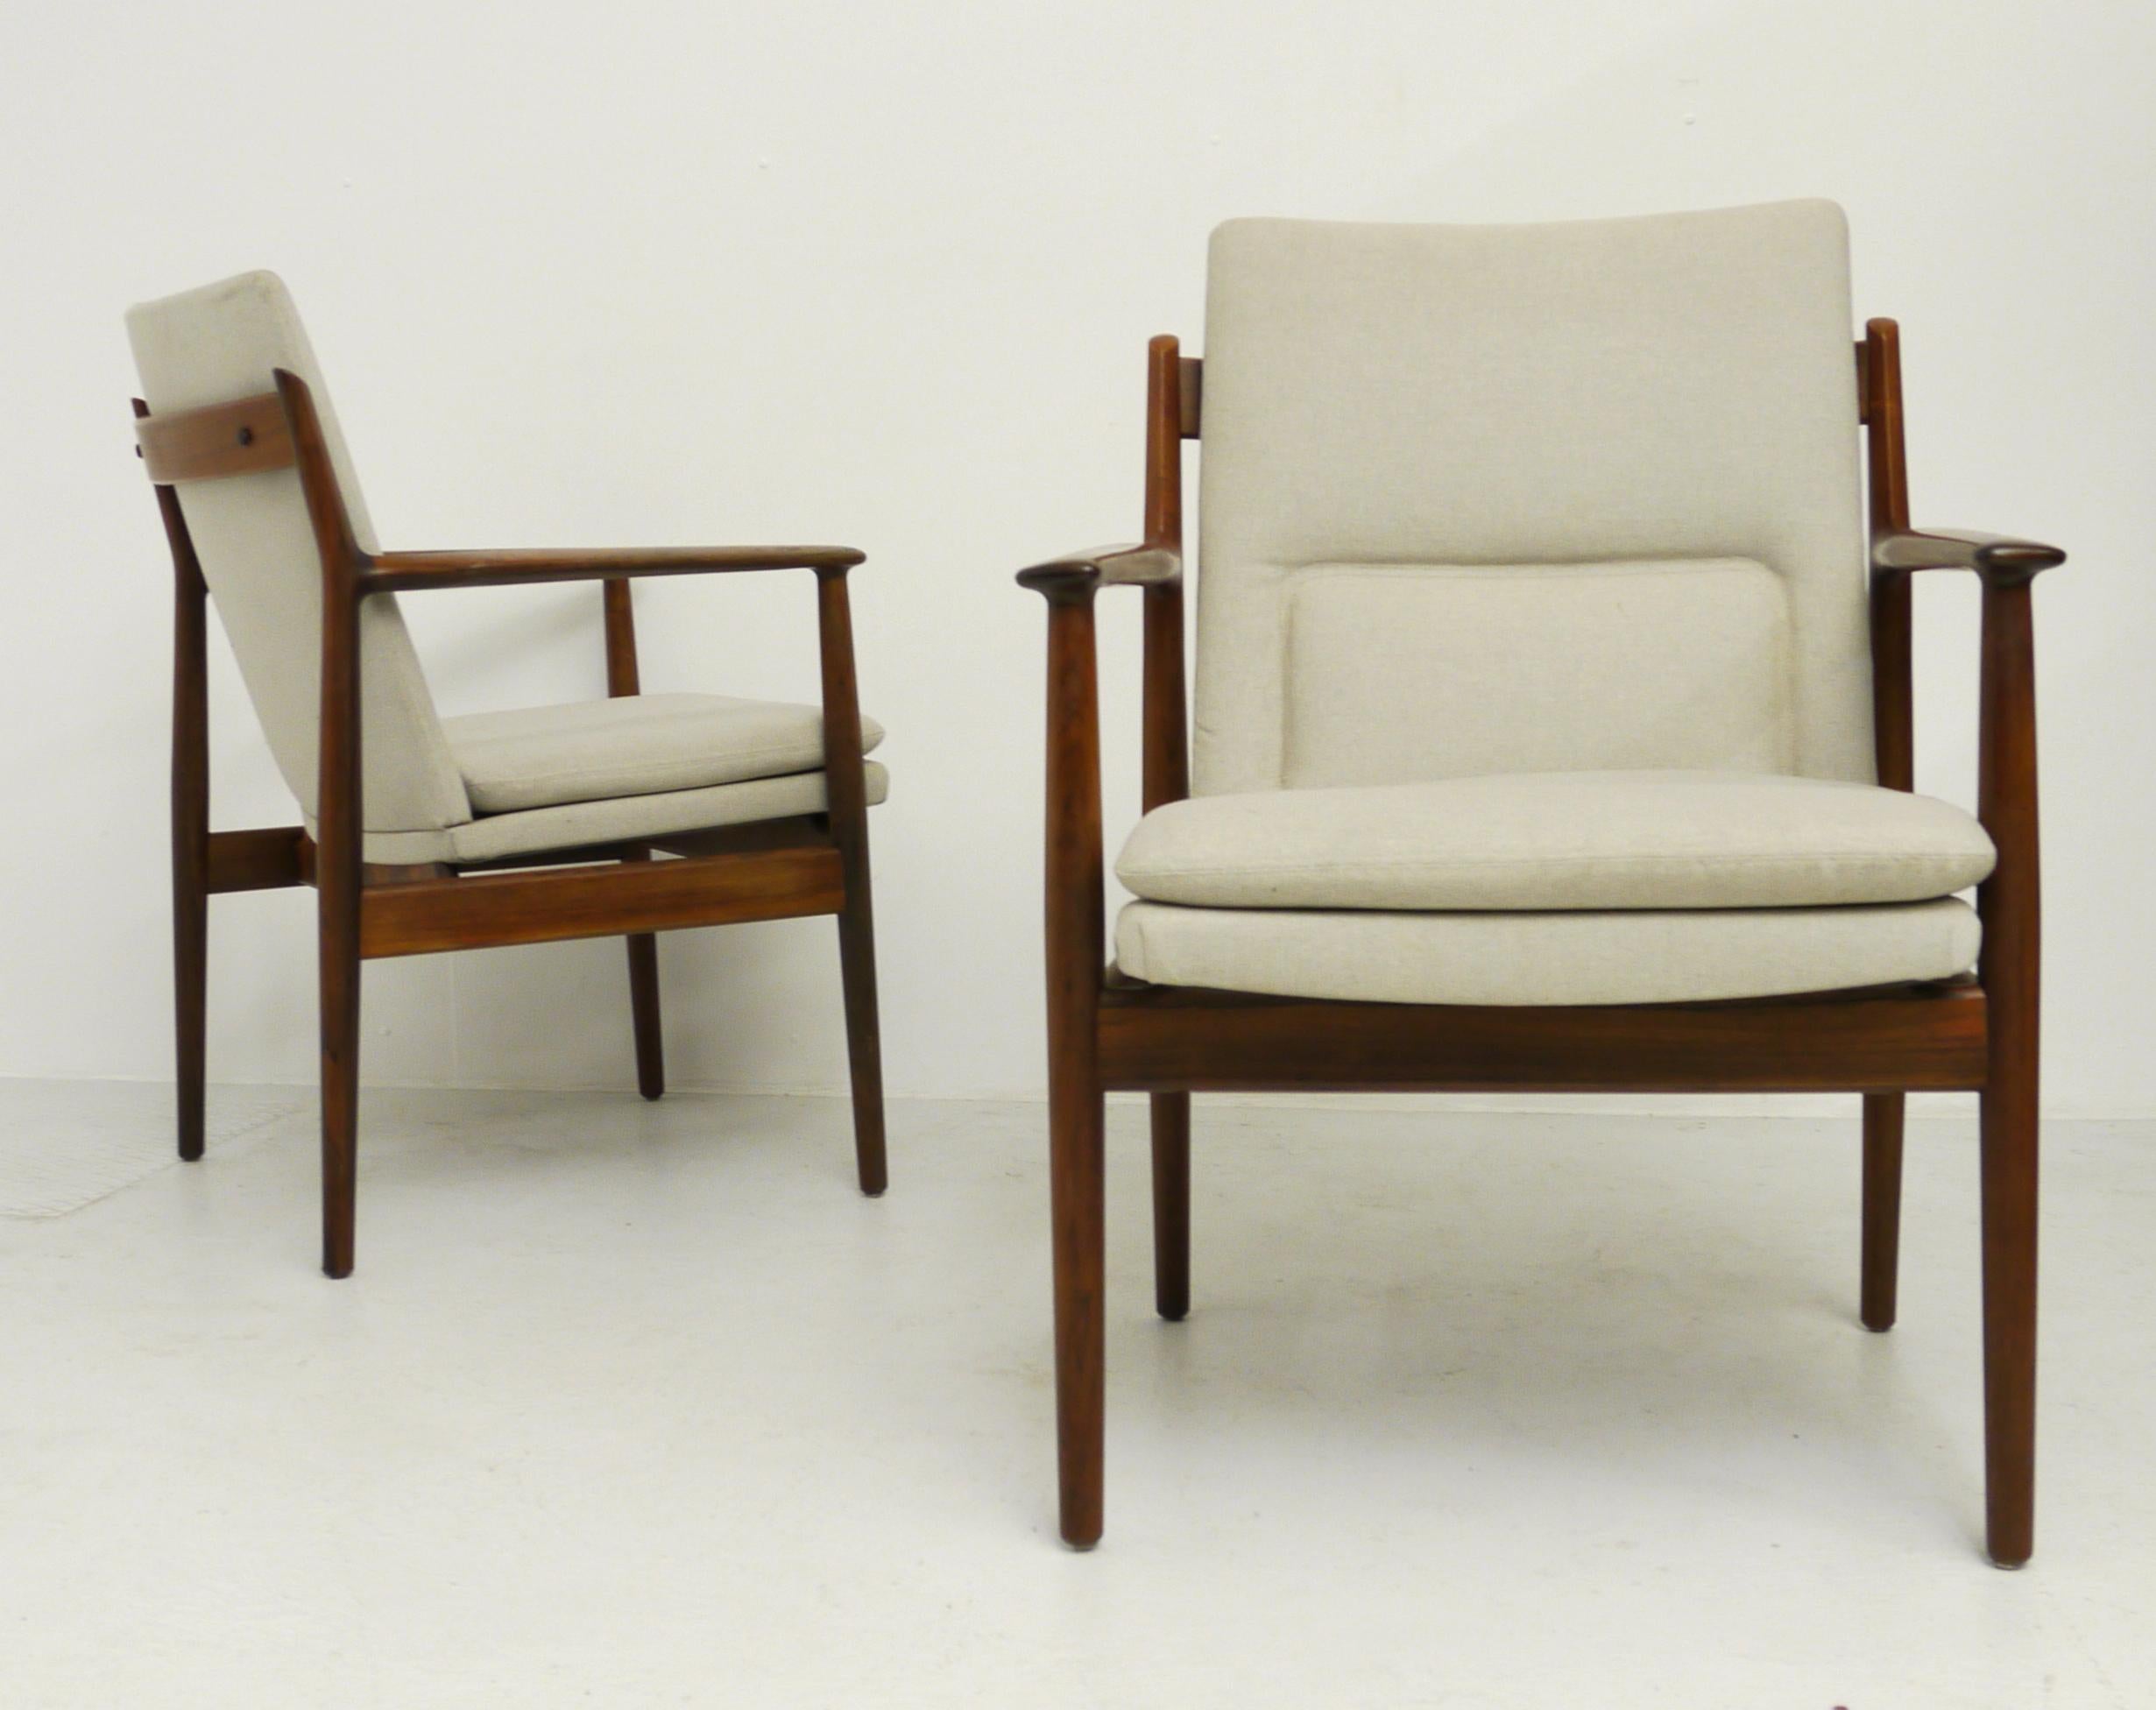 A rare set of armchairs, model 431, designed by Arne Vodder. Made in Denmark 1960s, produced by Sibast Mobler. It features a solid wooden frame in Palisander and a upholstery in beige. Very good vintage condition. 
Dimensions:
Wide 68 cm
Deep 62